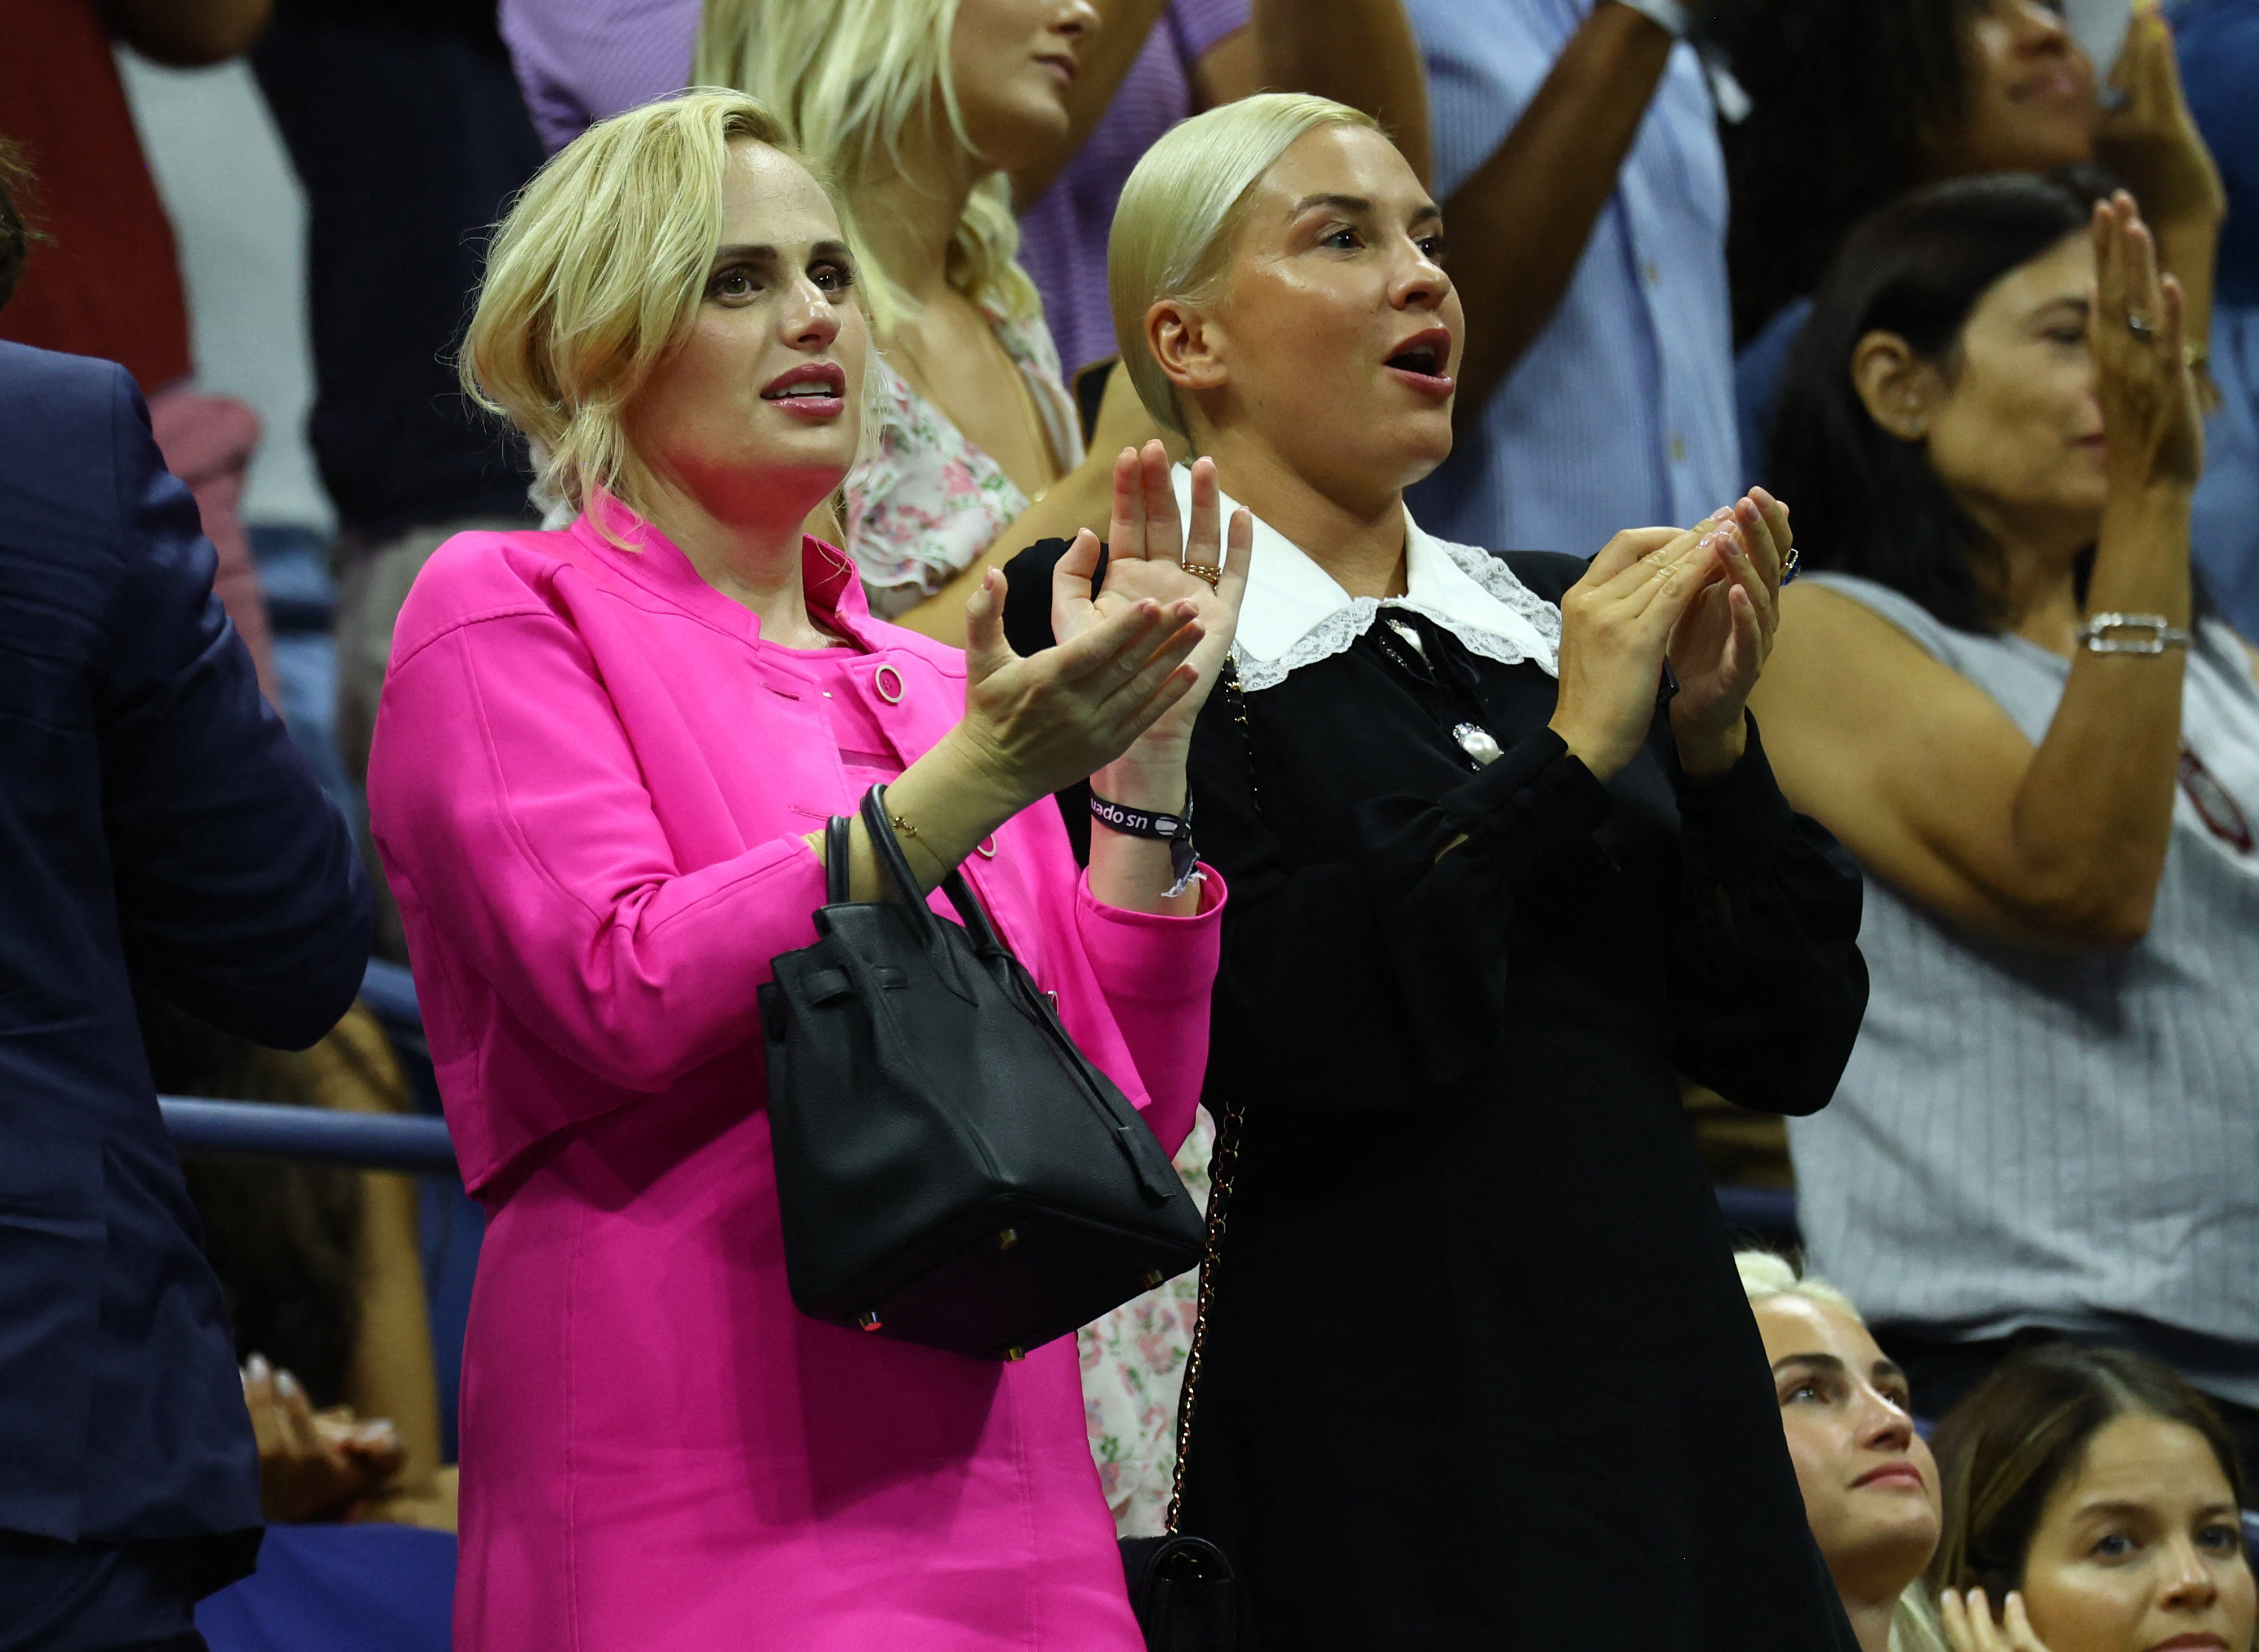   Actress Rebel Wilson and Ramona Agruma are seen during the first round match between Serena Williams of the USA and Danka Kovinic (Photo: REUTERS/Mike Segar of Montenegro)